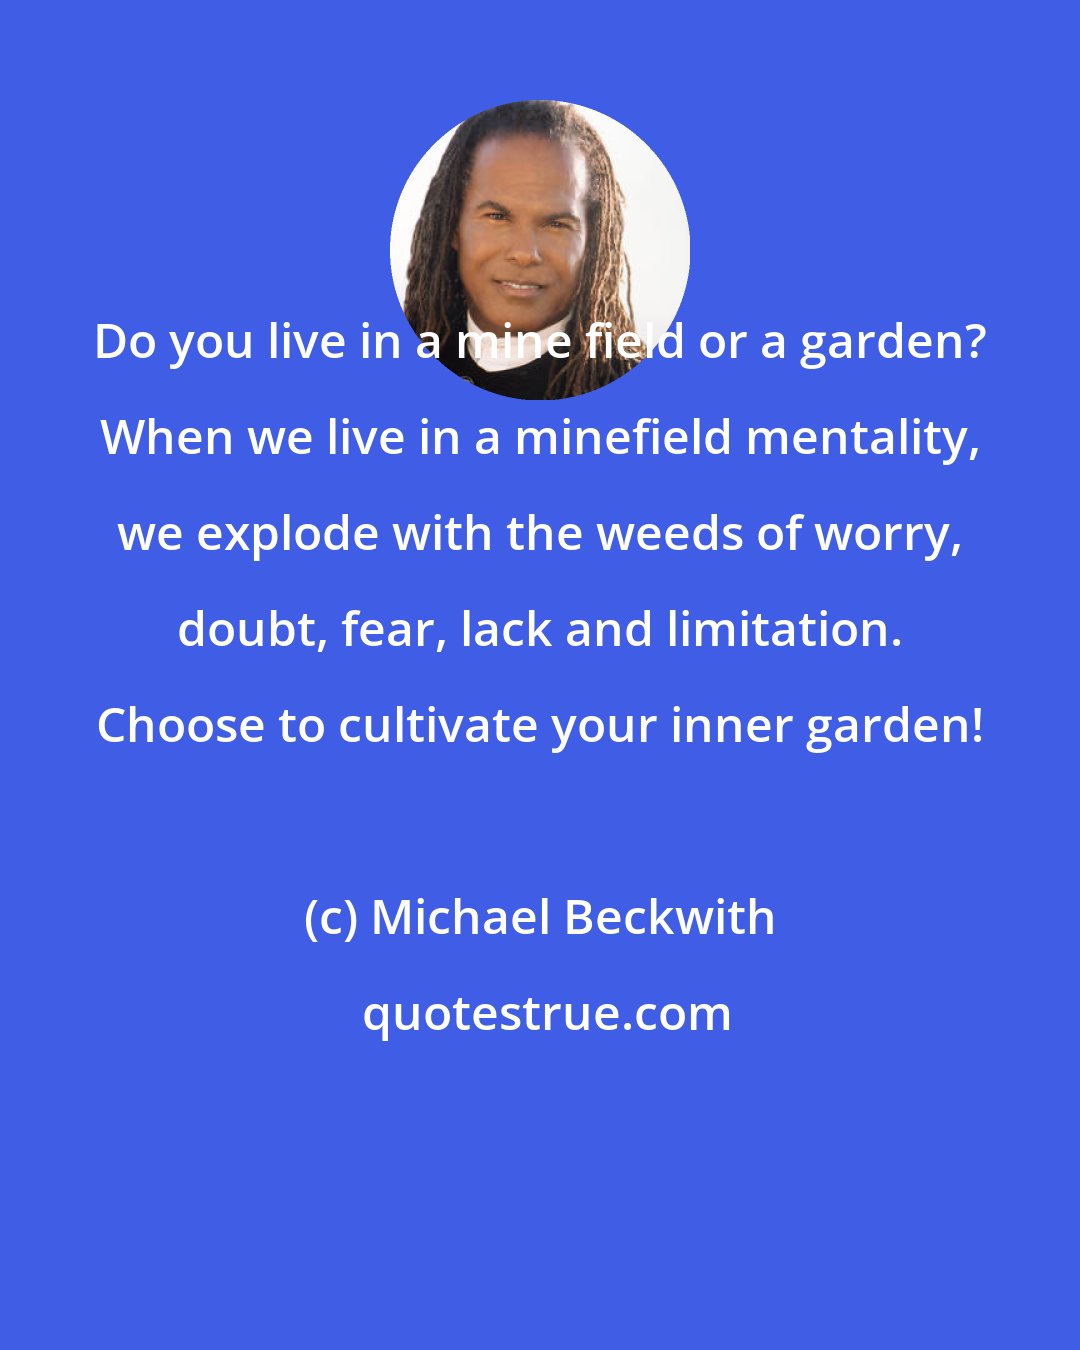 Michael Beckwith: Do you live in a mine field or a garden? When we live in a minefield mentality, we explode with the weeds of worry, doubt, fear, lack and limitation. Choose to cultivate your inner garden!